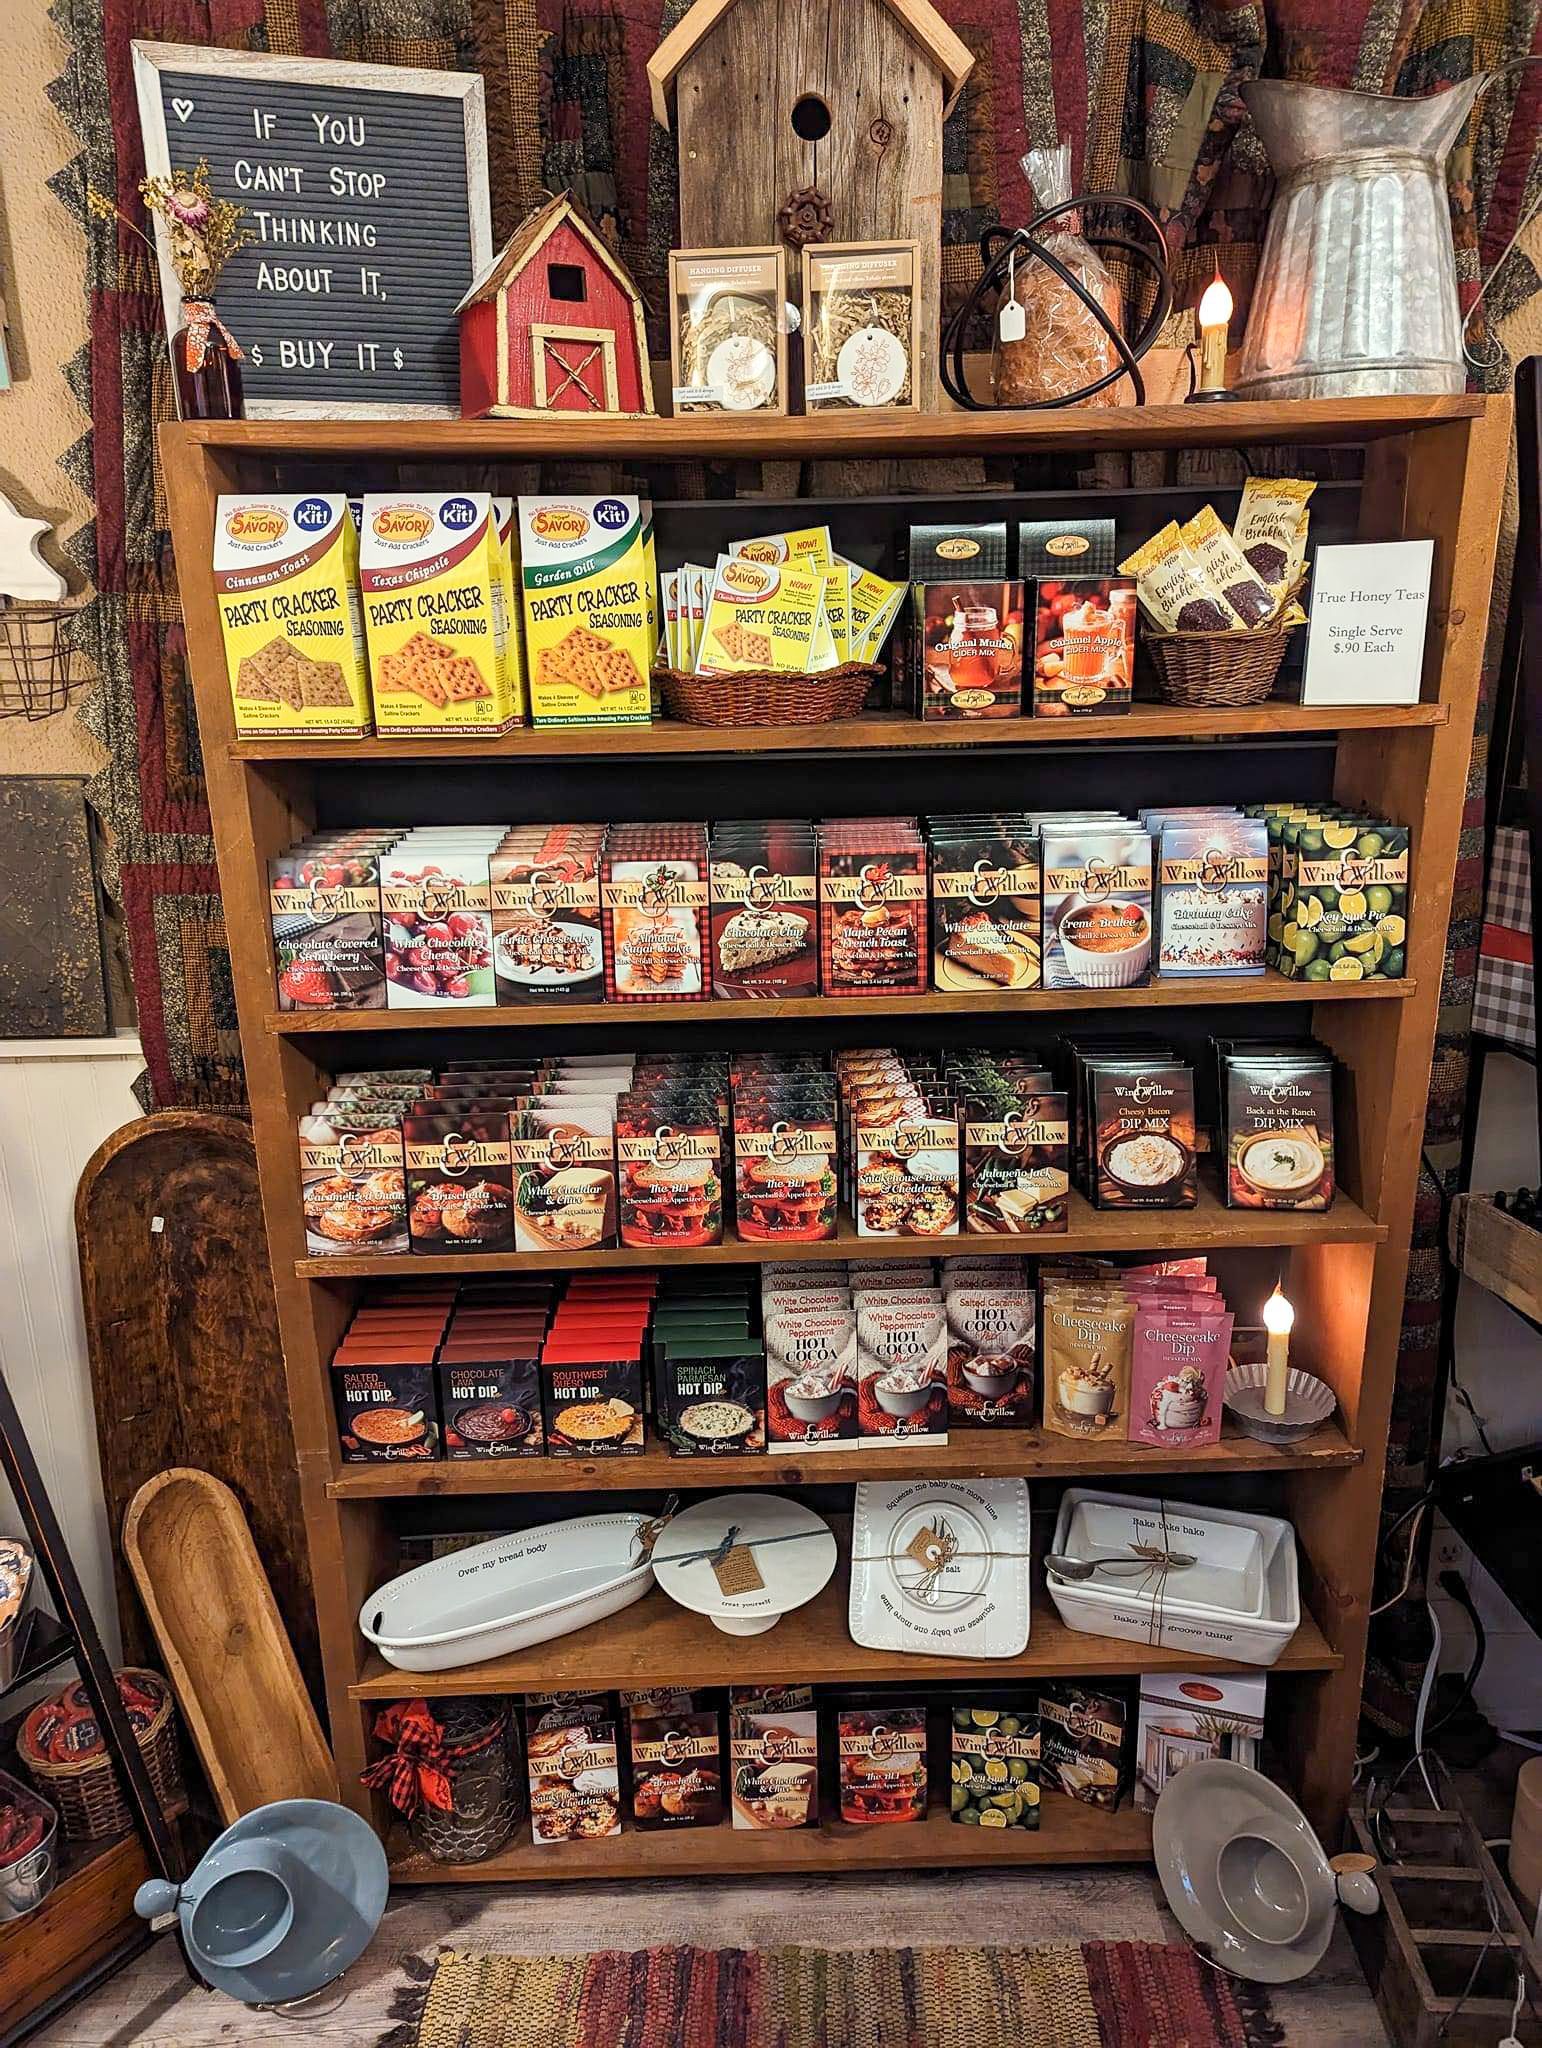 A wooden shelf filled with lots of food and candles.